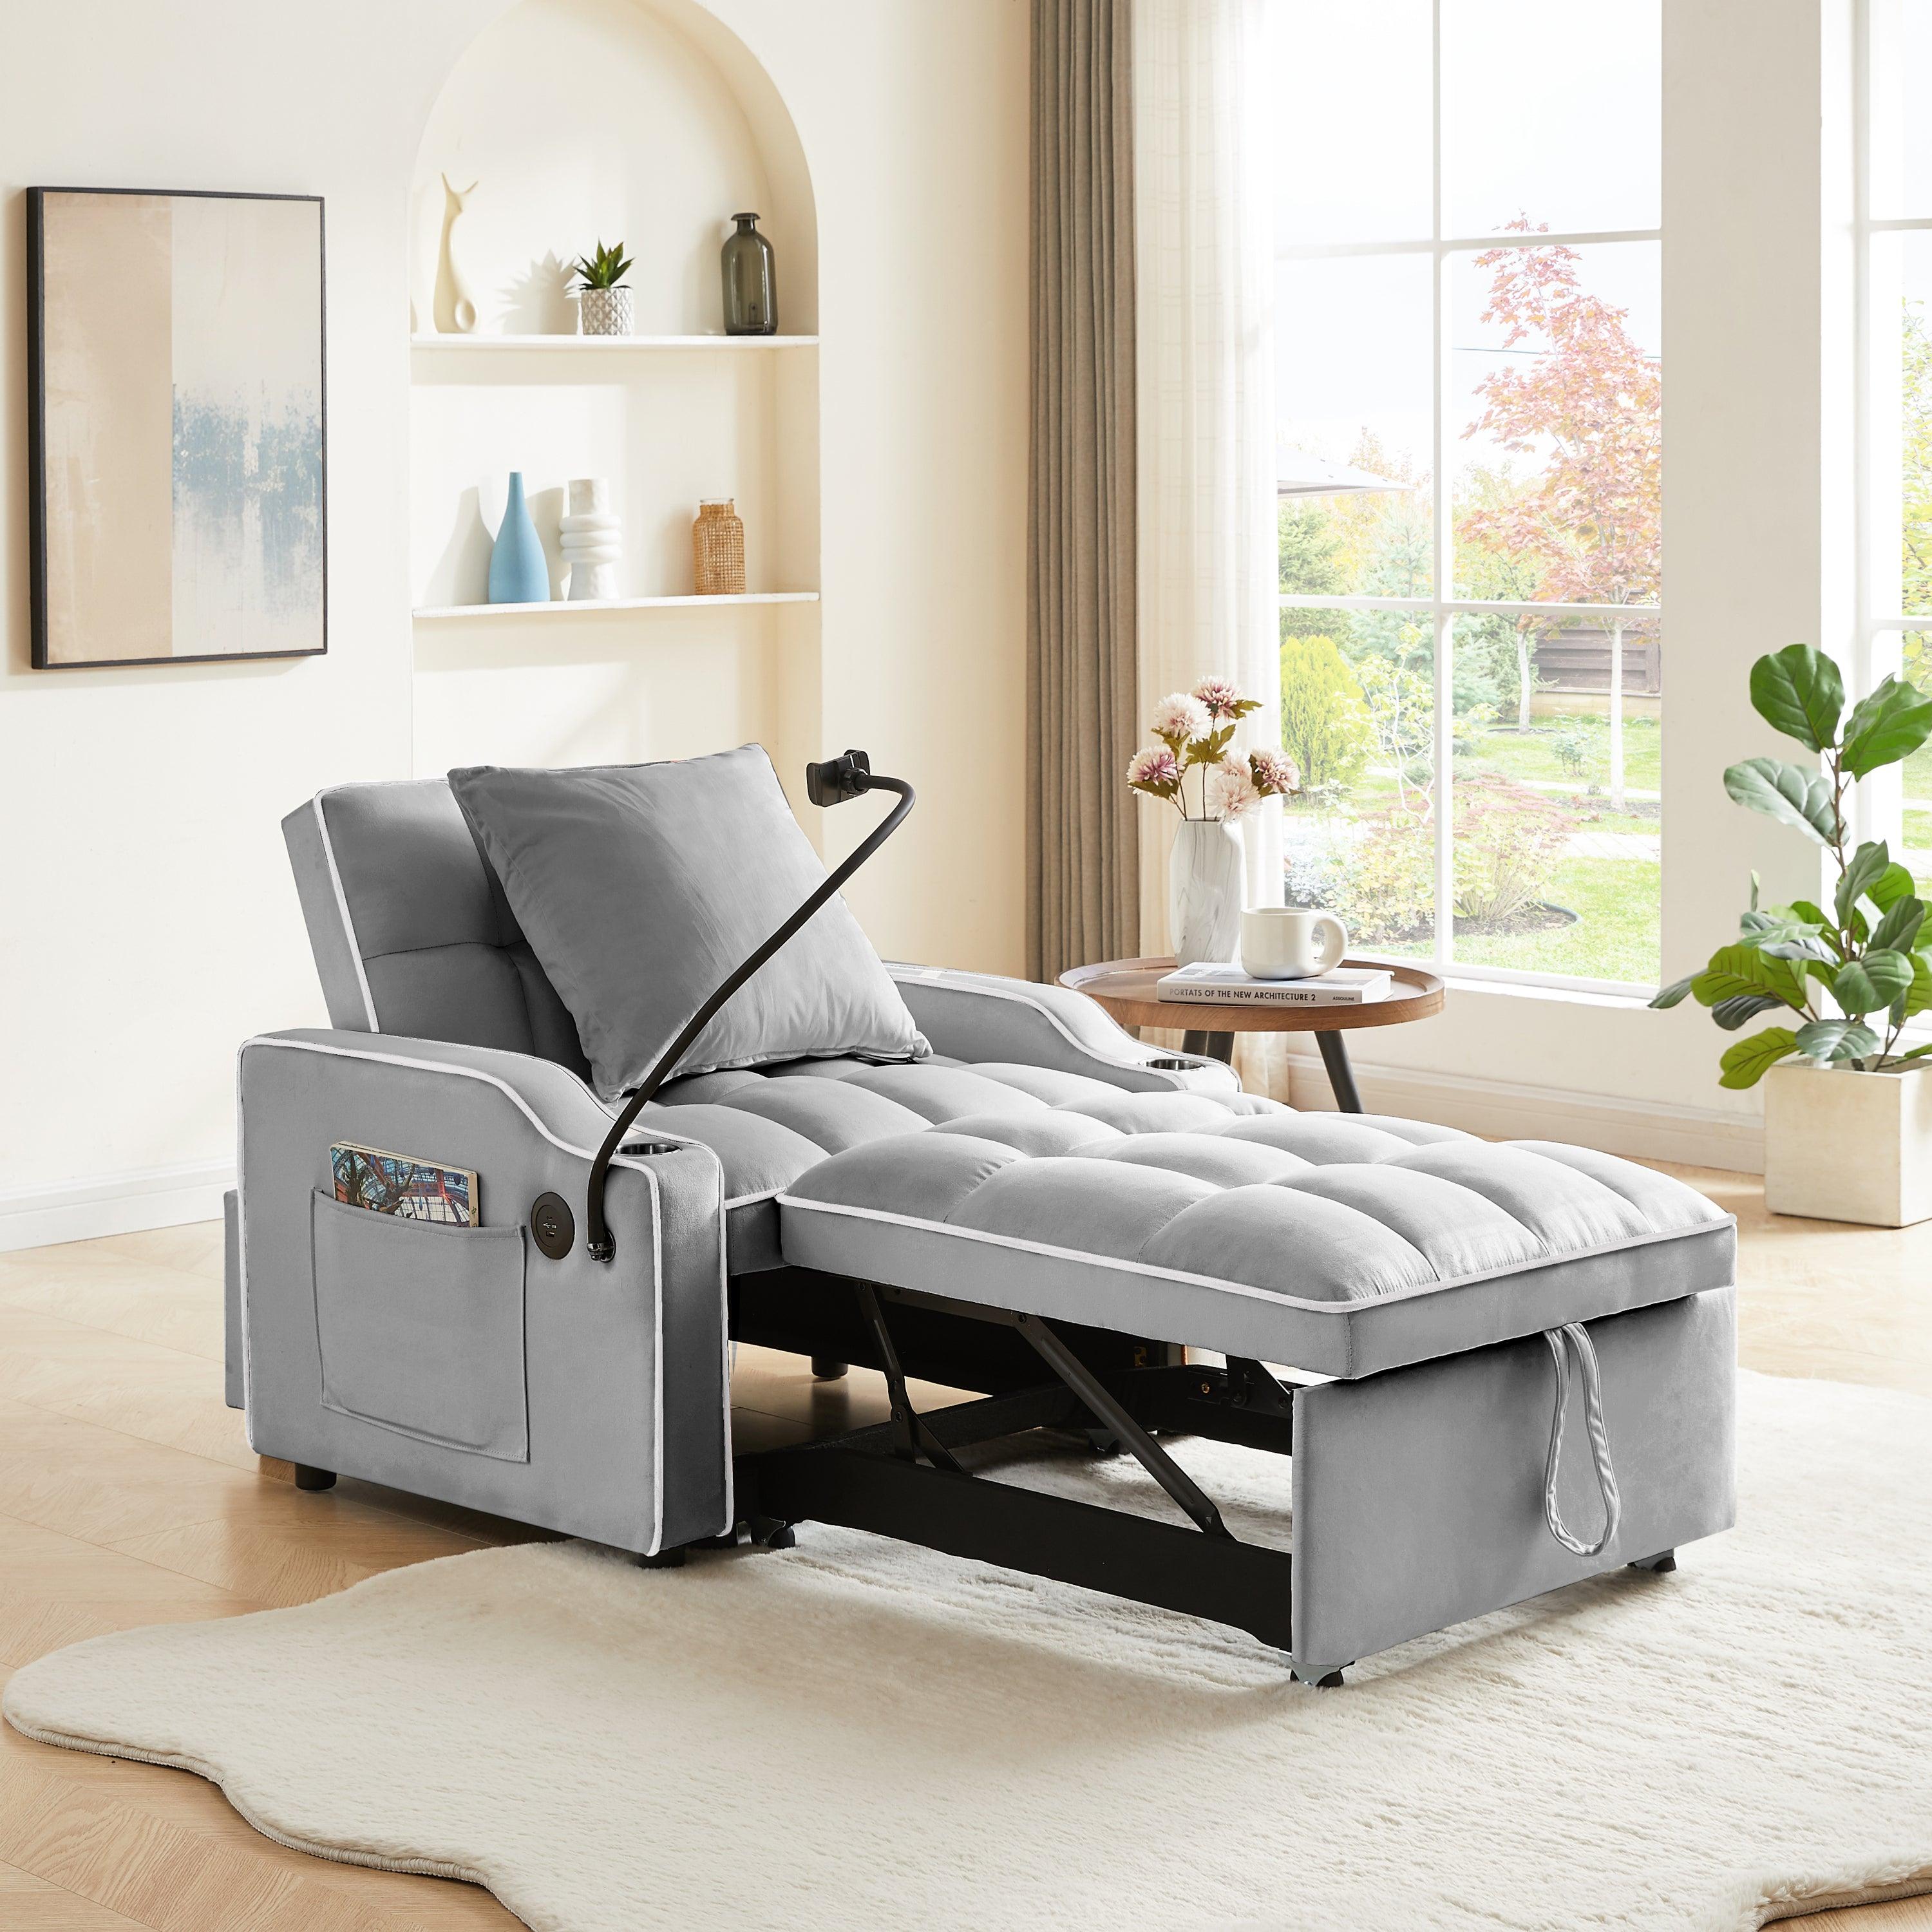 🆓🚛 3-in-1 Sofa Bed, Convertible Sleeper Chair Sofa Bed Adjustable Pull Out Sleeper Chair Bed Multi-Pockets Folding Sofa Bed for Living Room Bedroom Small Space (Gray)